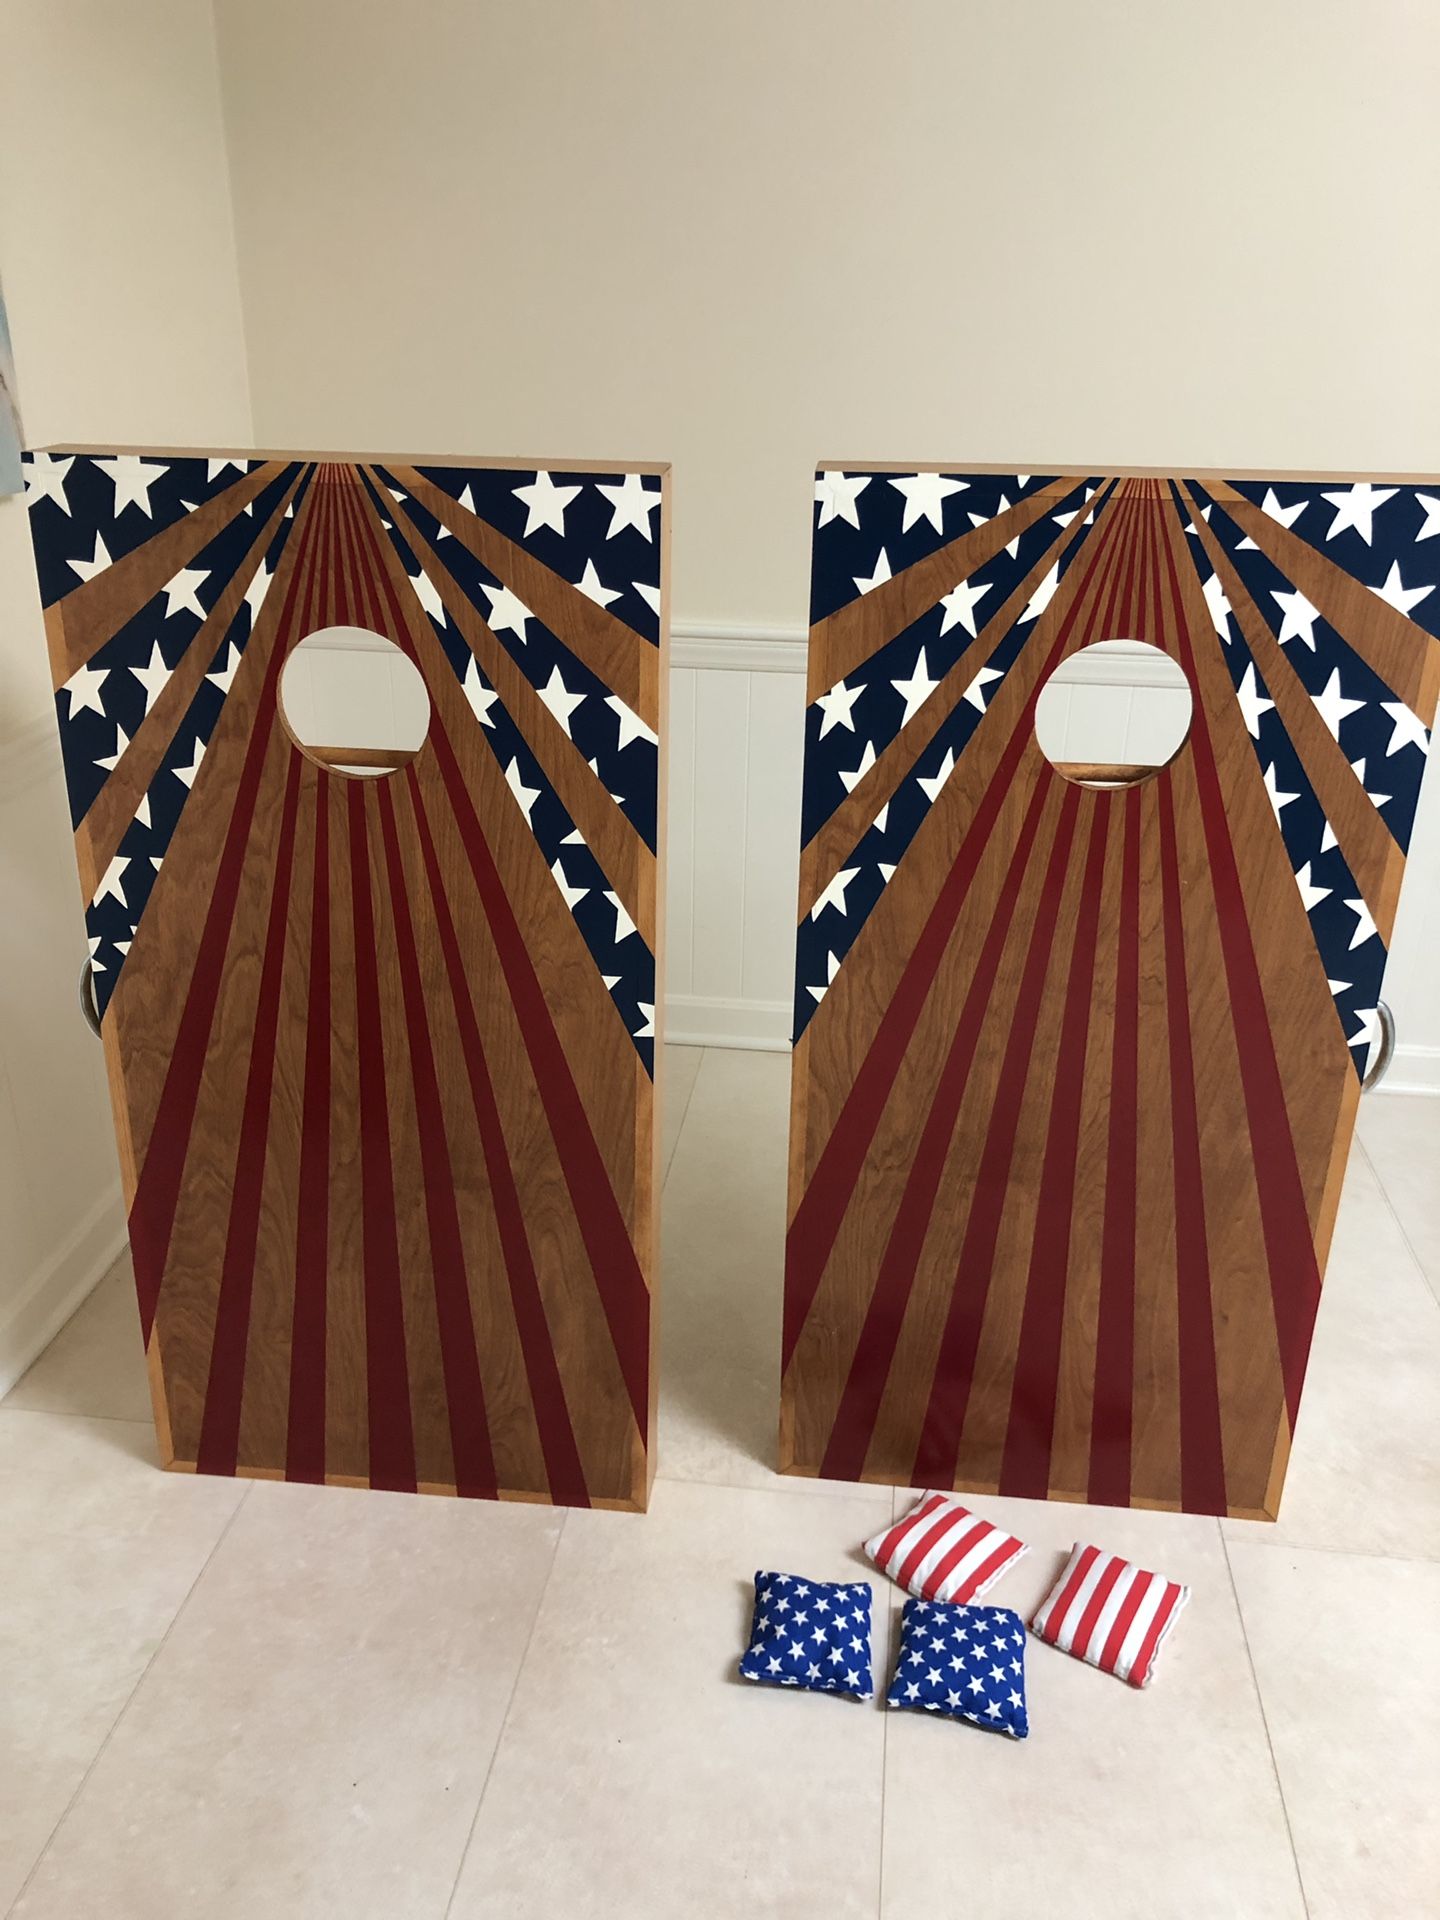 BRAND NEW Corn Hole Set- REAL WOOD, hand painted (7 lawyers of paint)